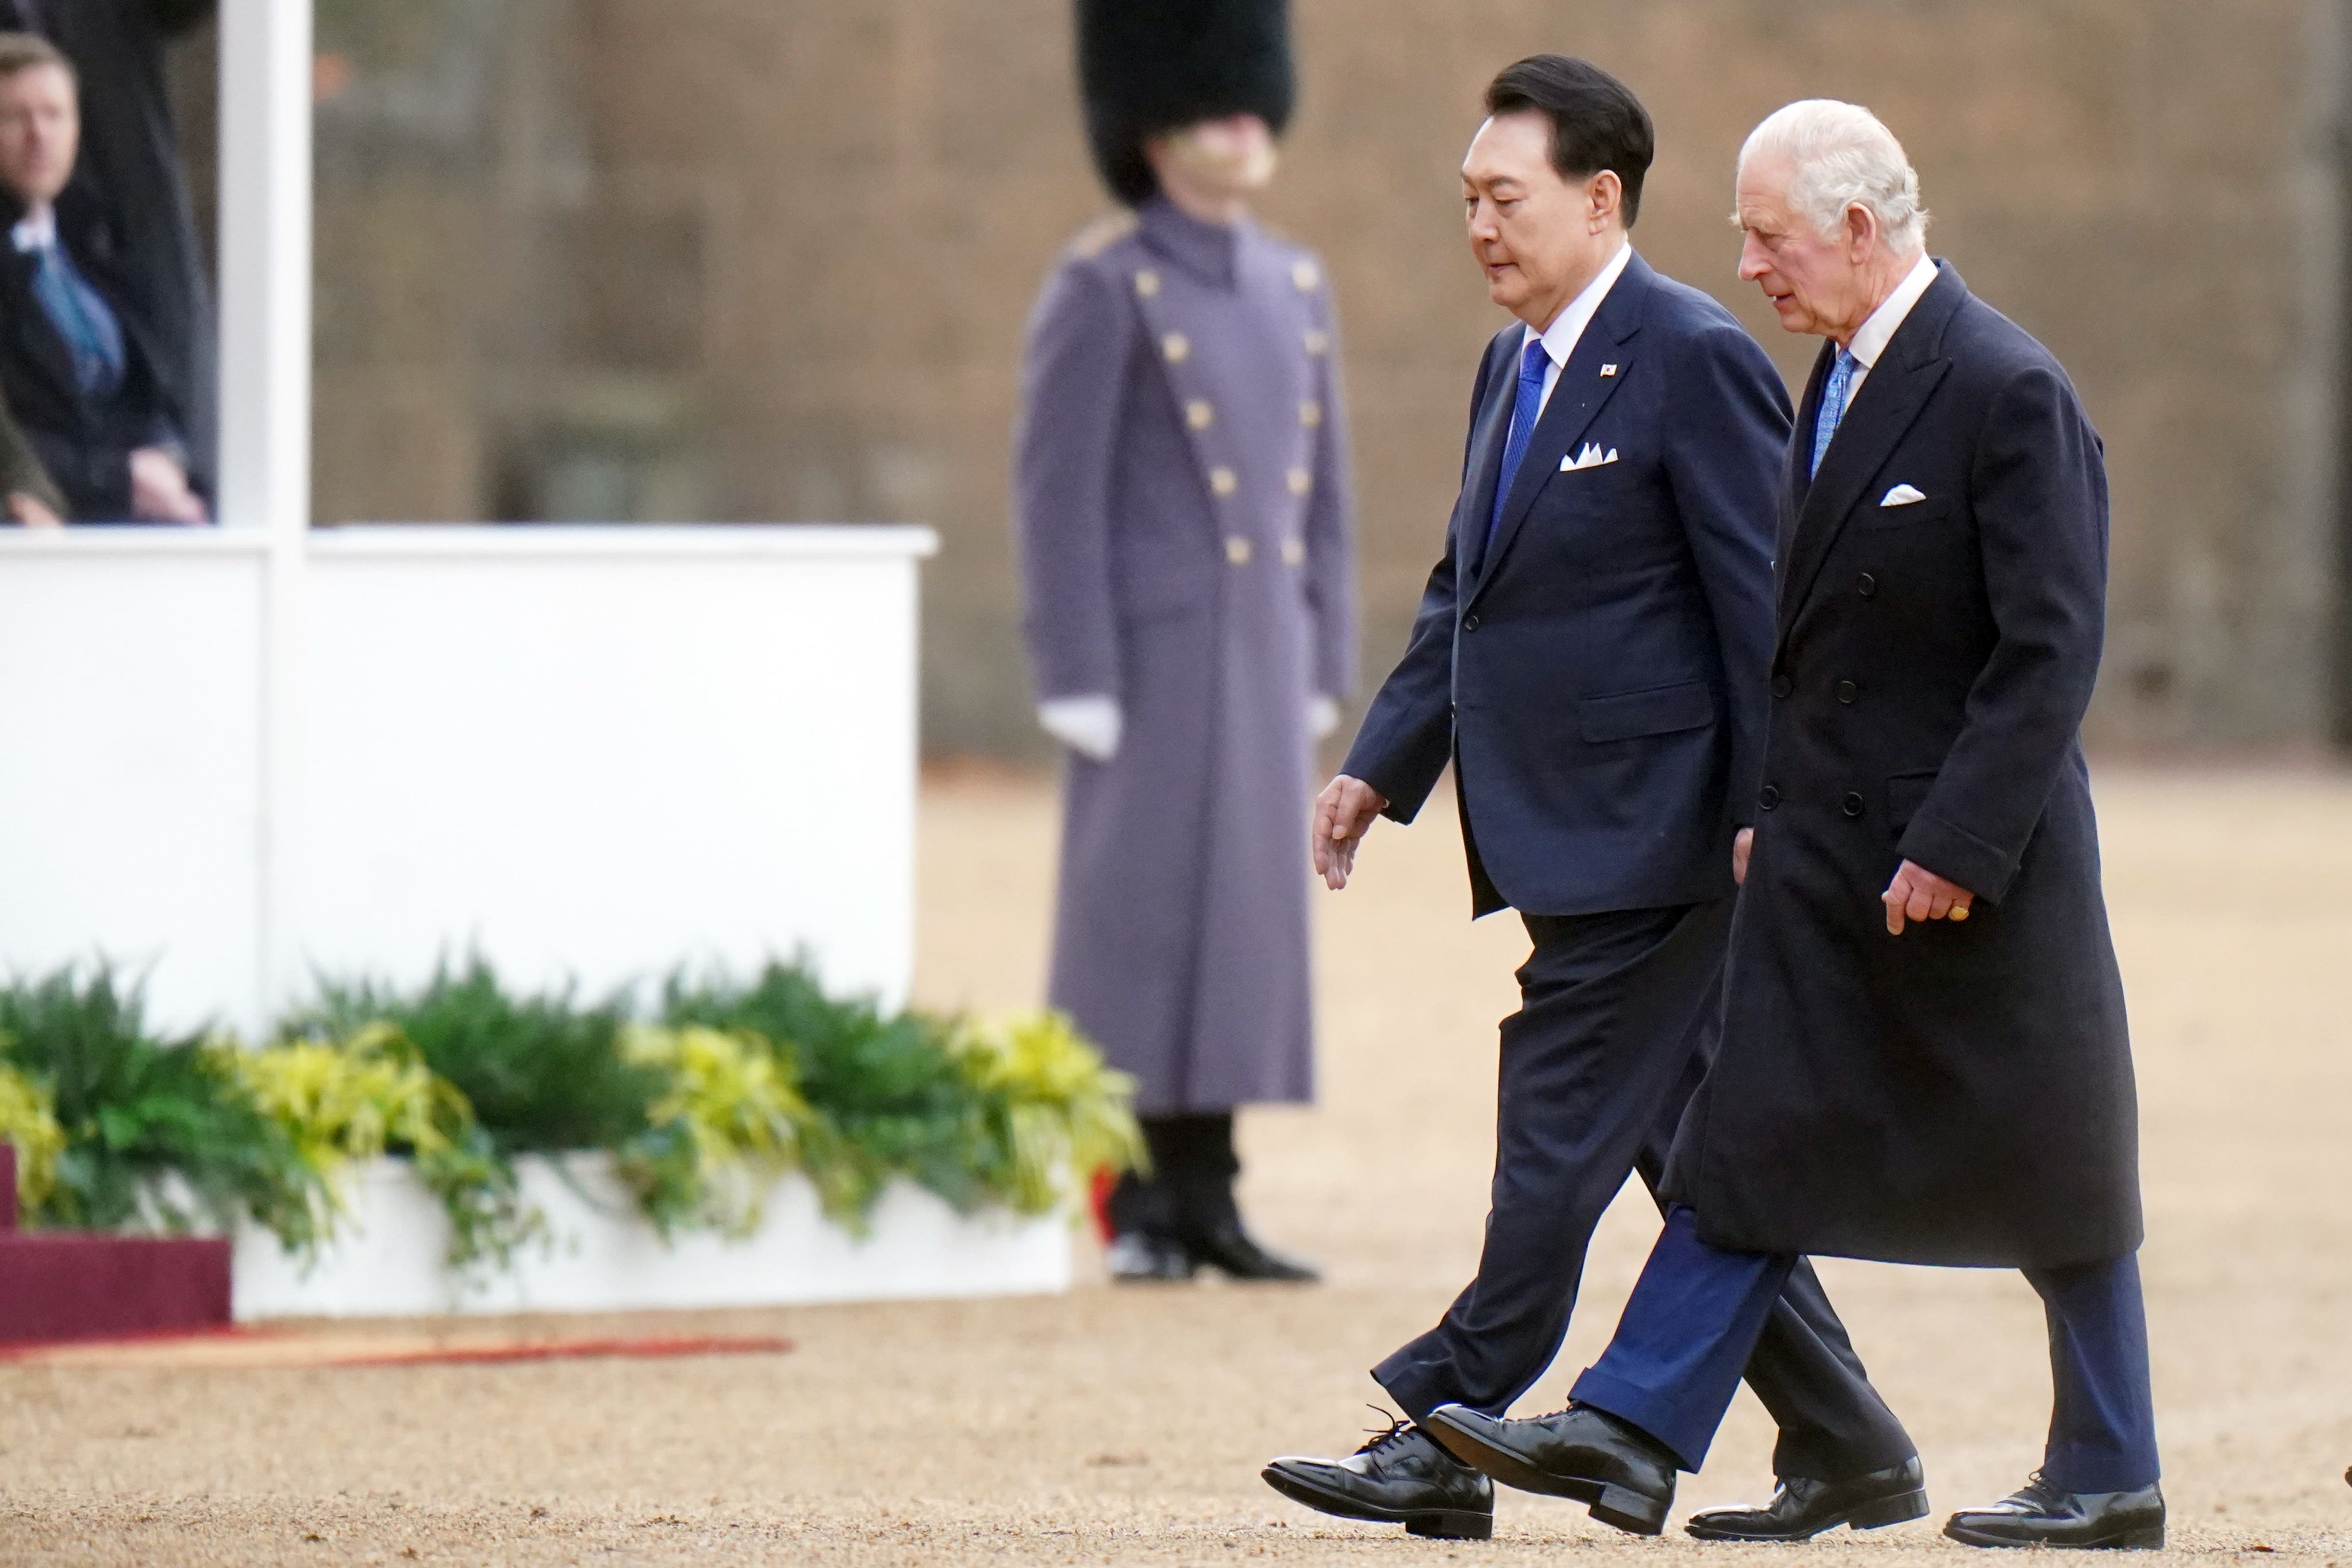 King Charles accompanied the president of South Korea, Yoon Suk Yeol, during the ceremonial welcome (Victoria Jones/PA)